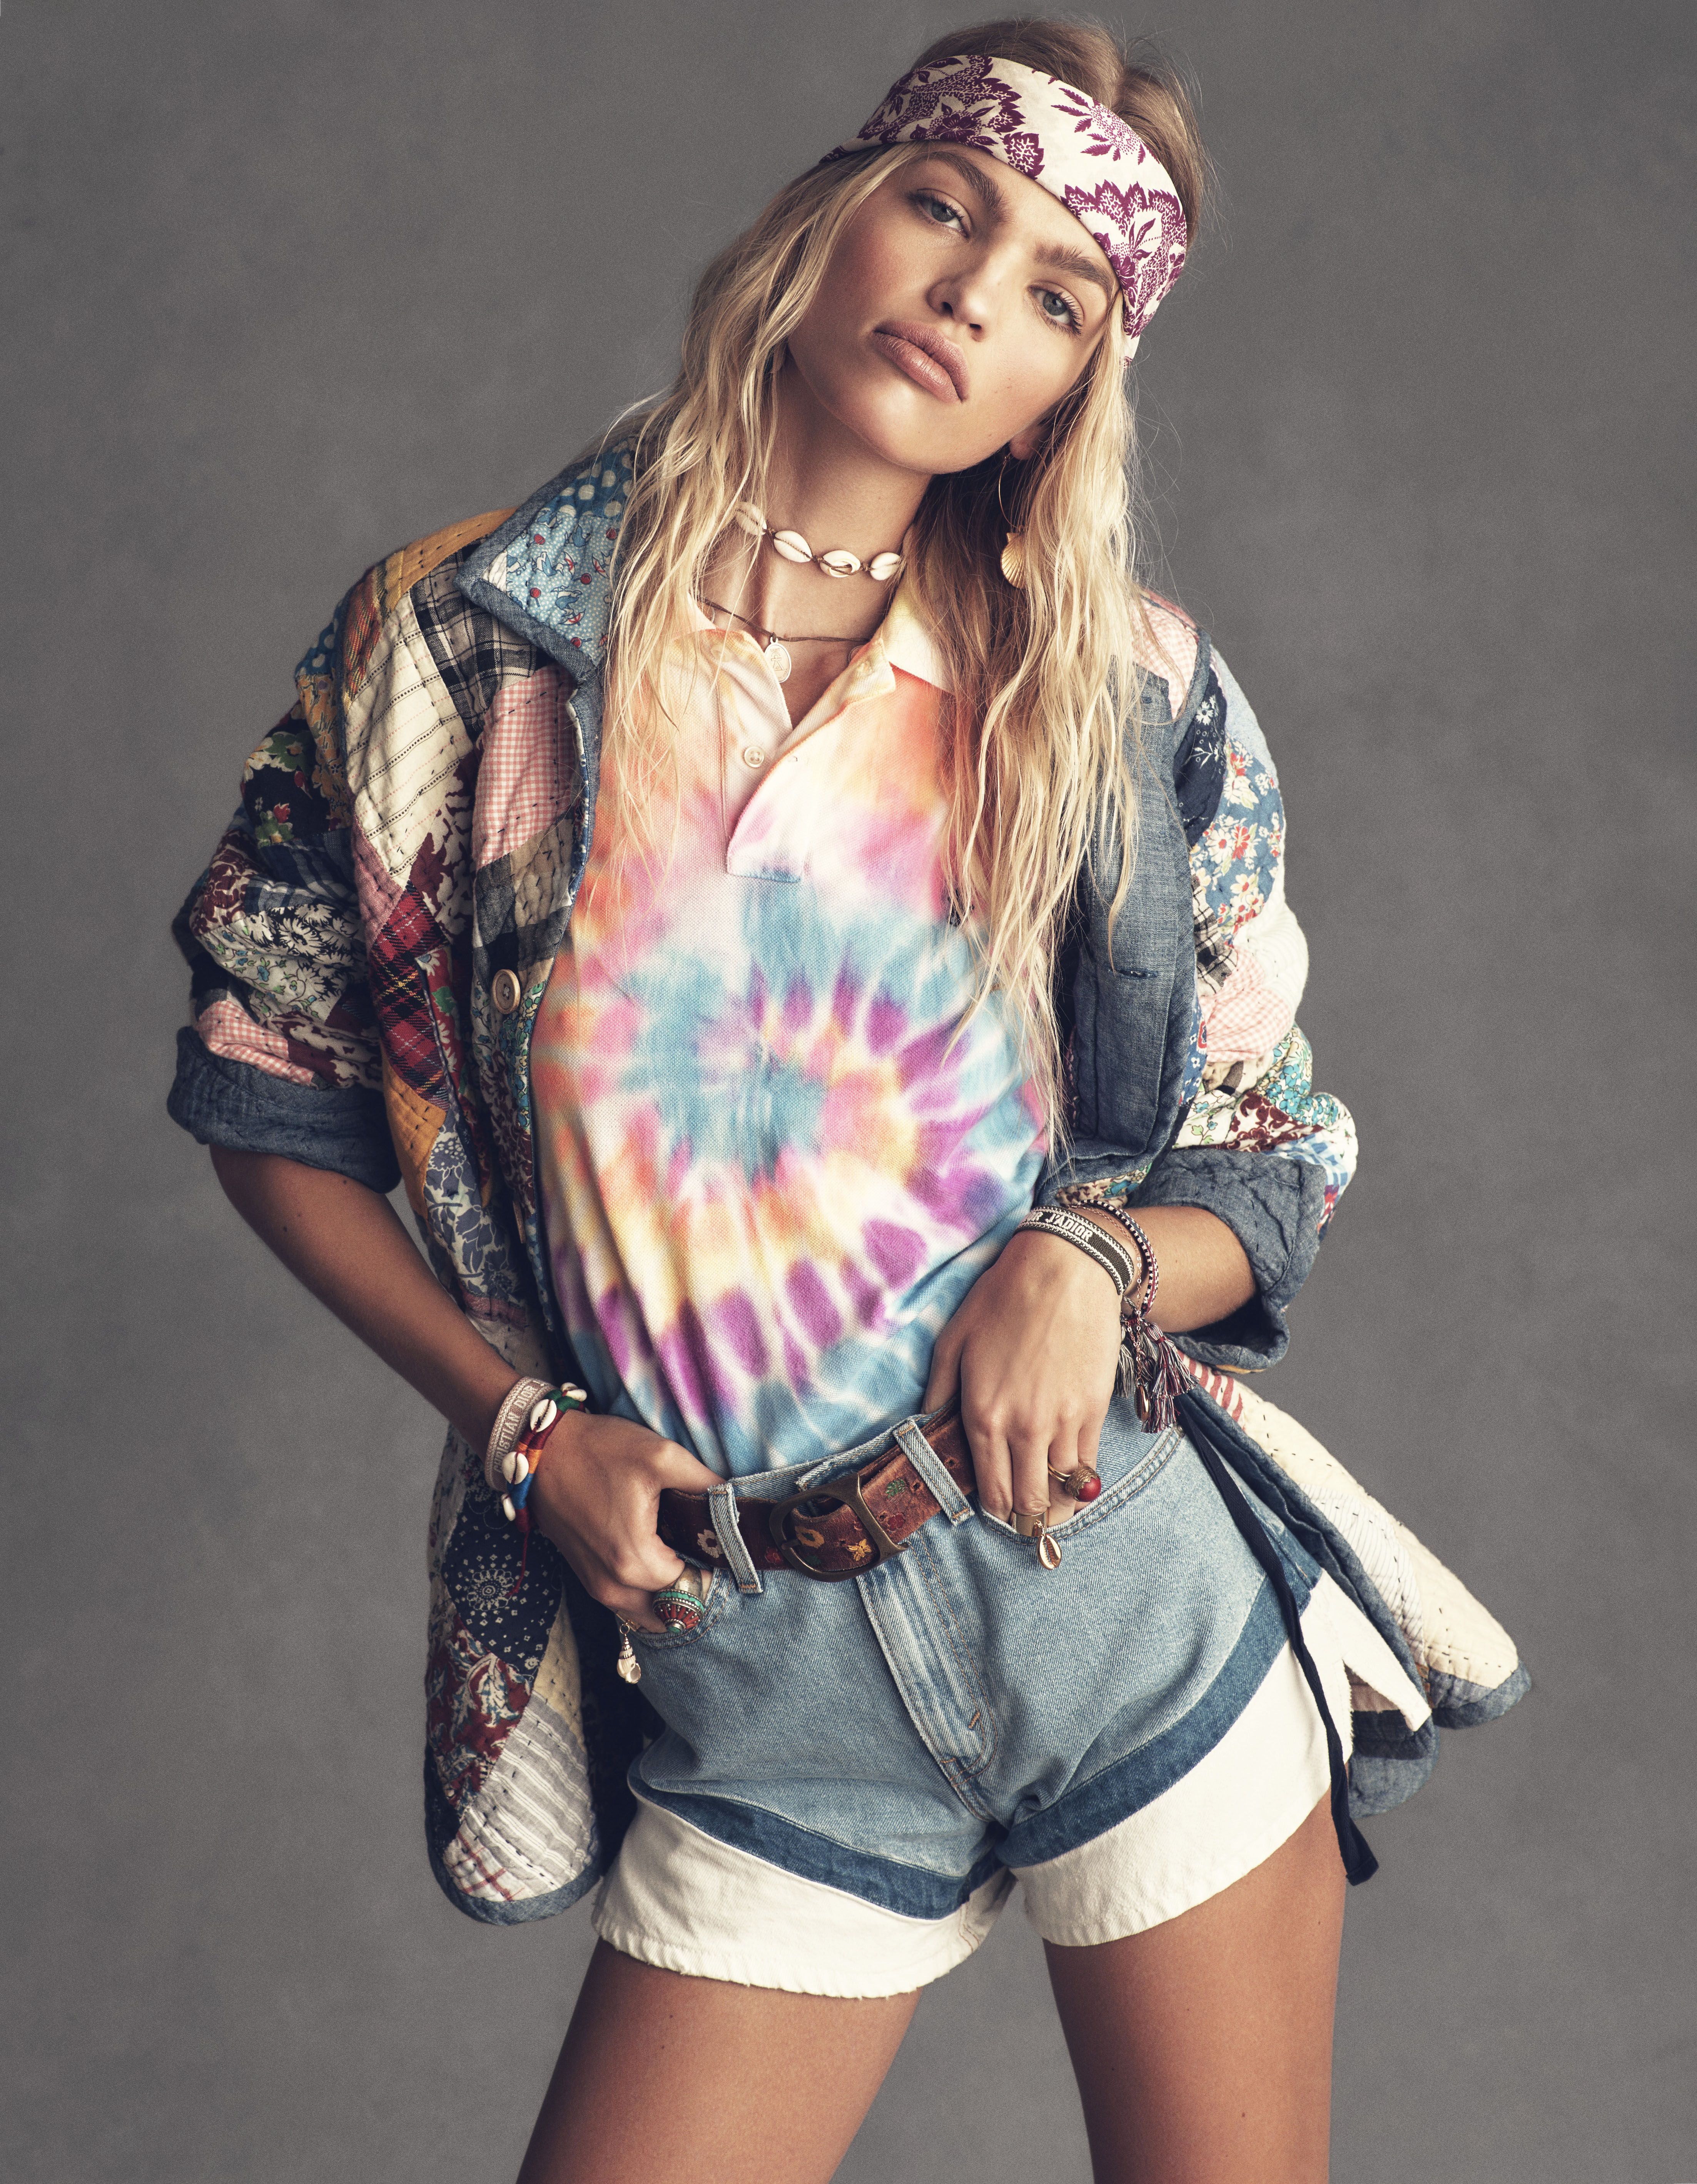 woodstock outfits female